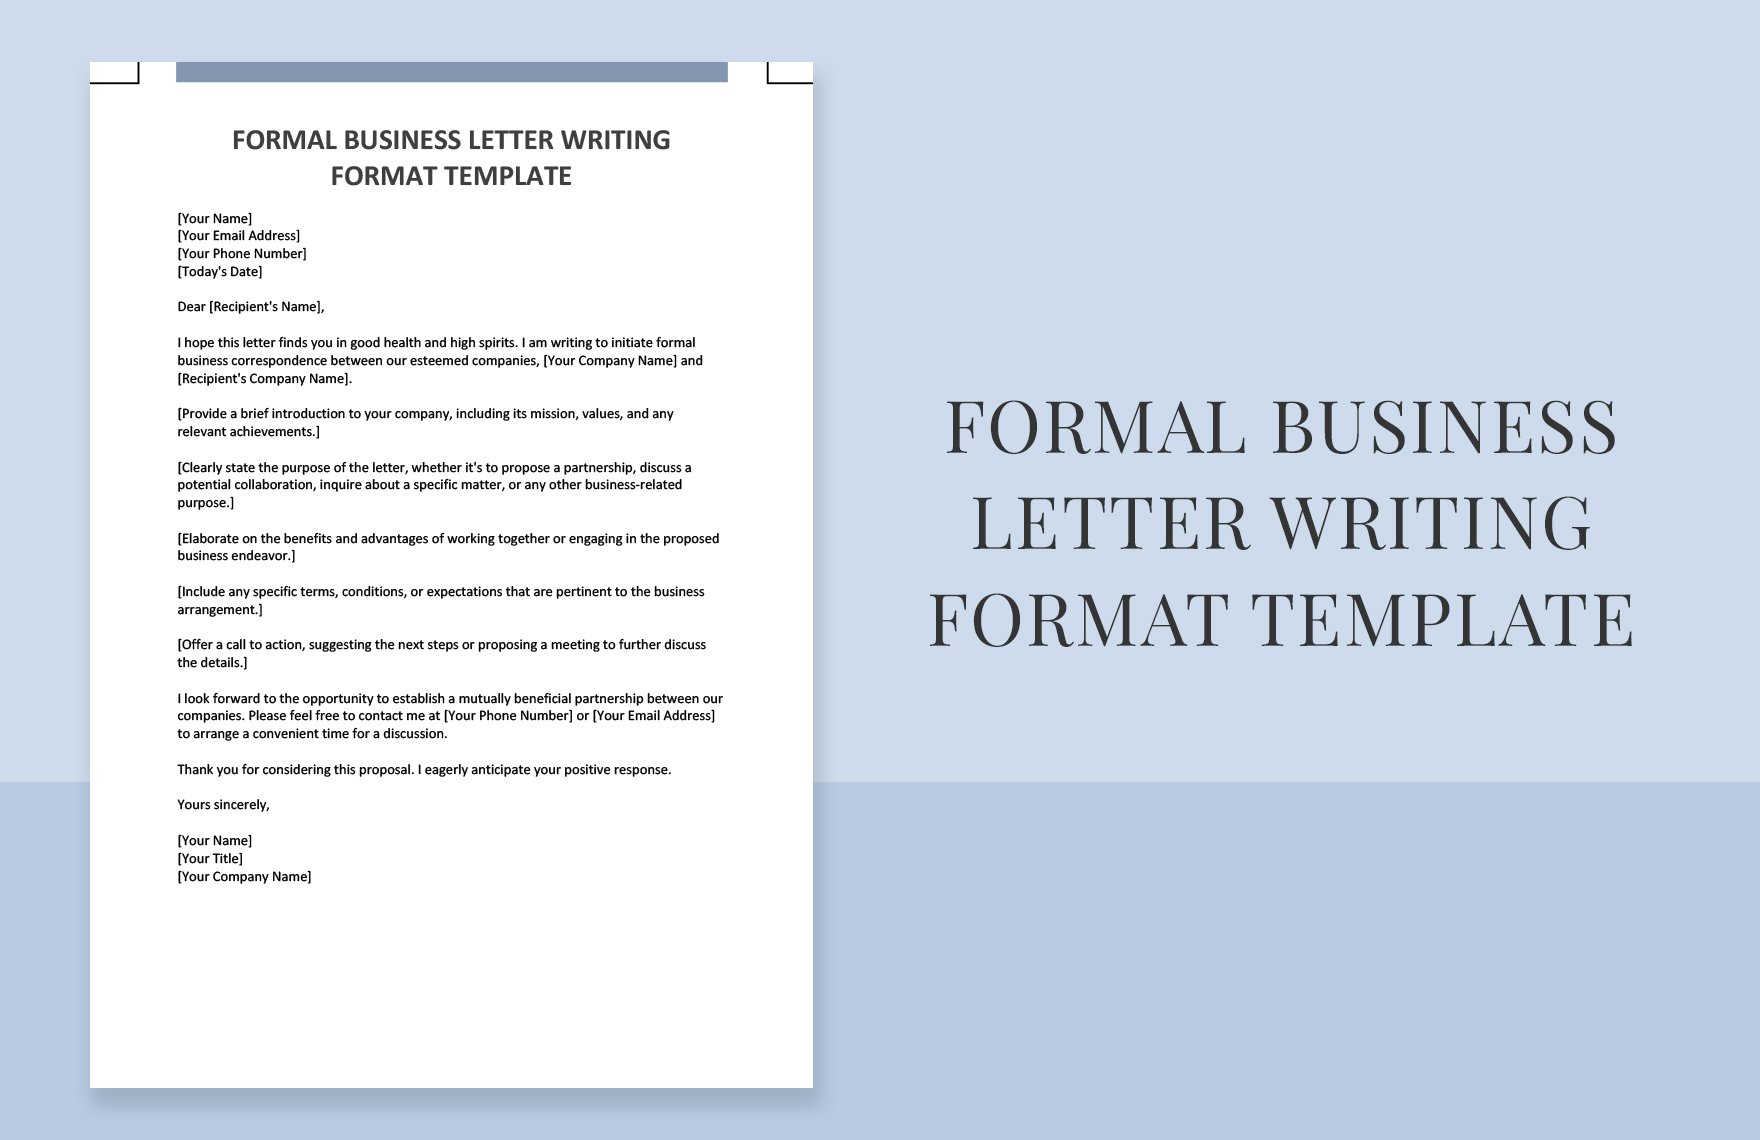 Formal Business Letter Writing Format Template